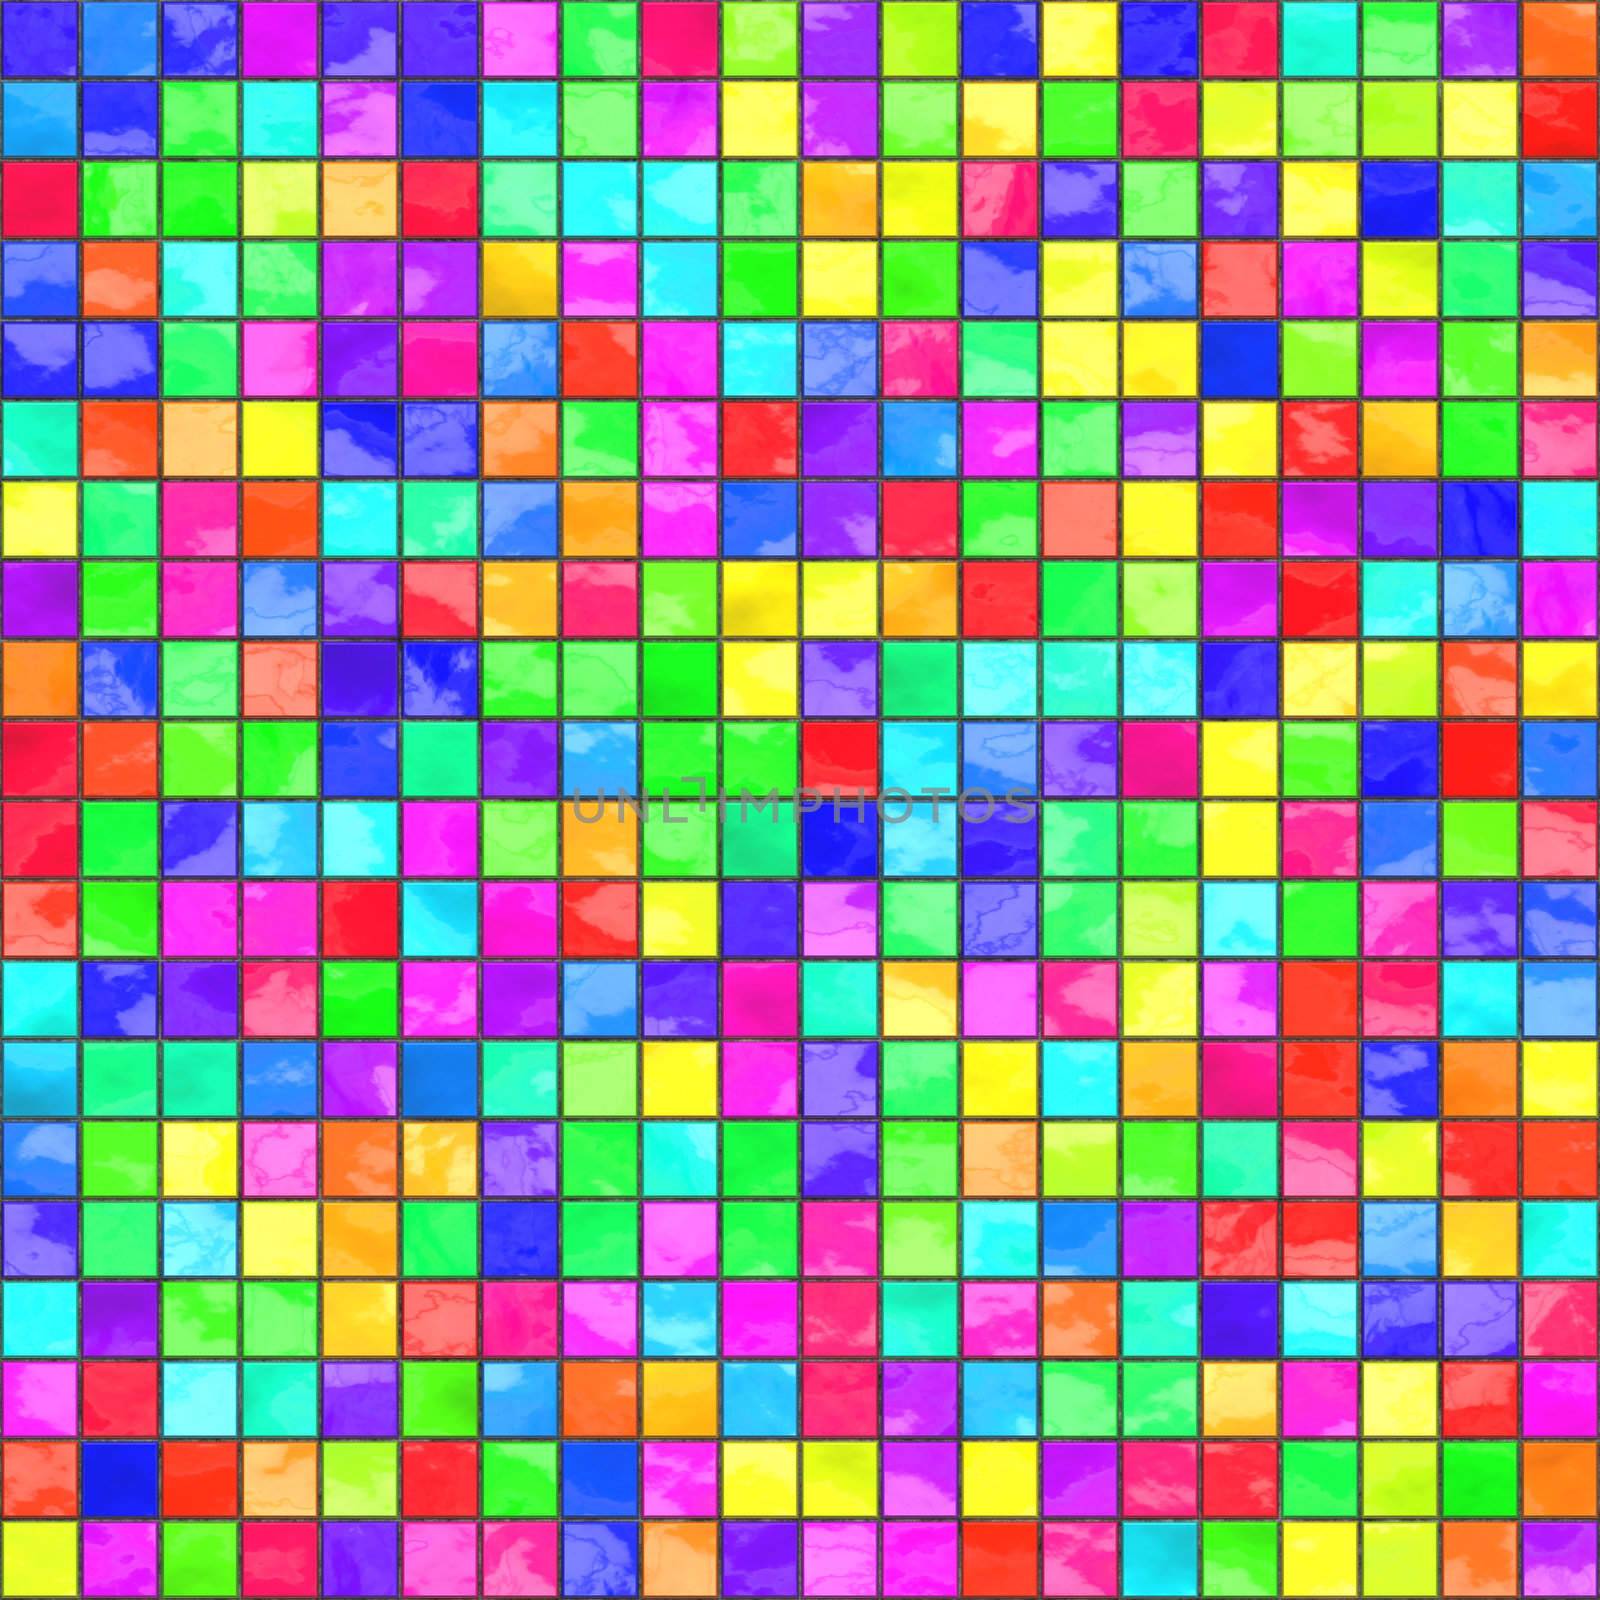 multicolored small neon tiles background, tiles seamlessly as a pattern